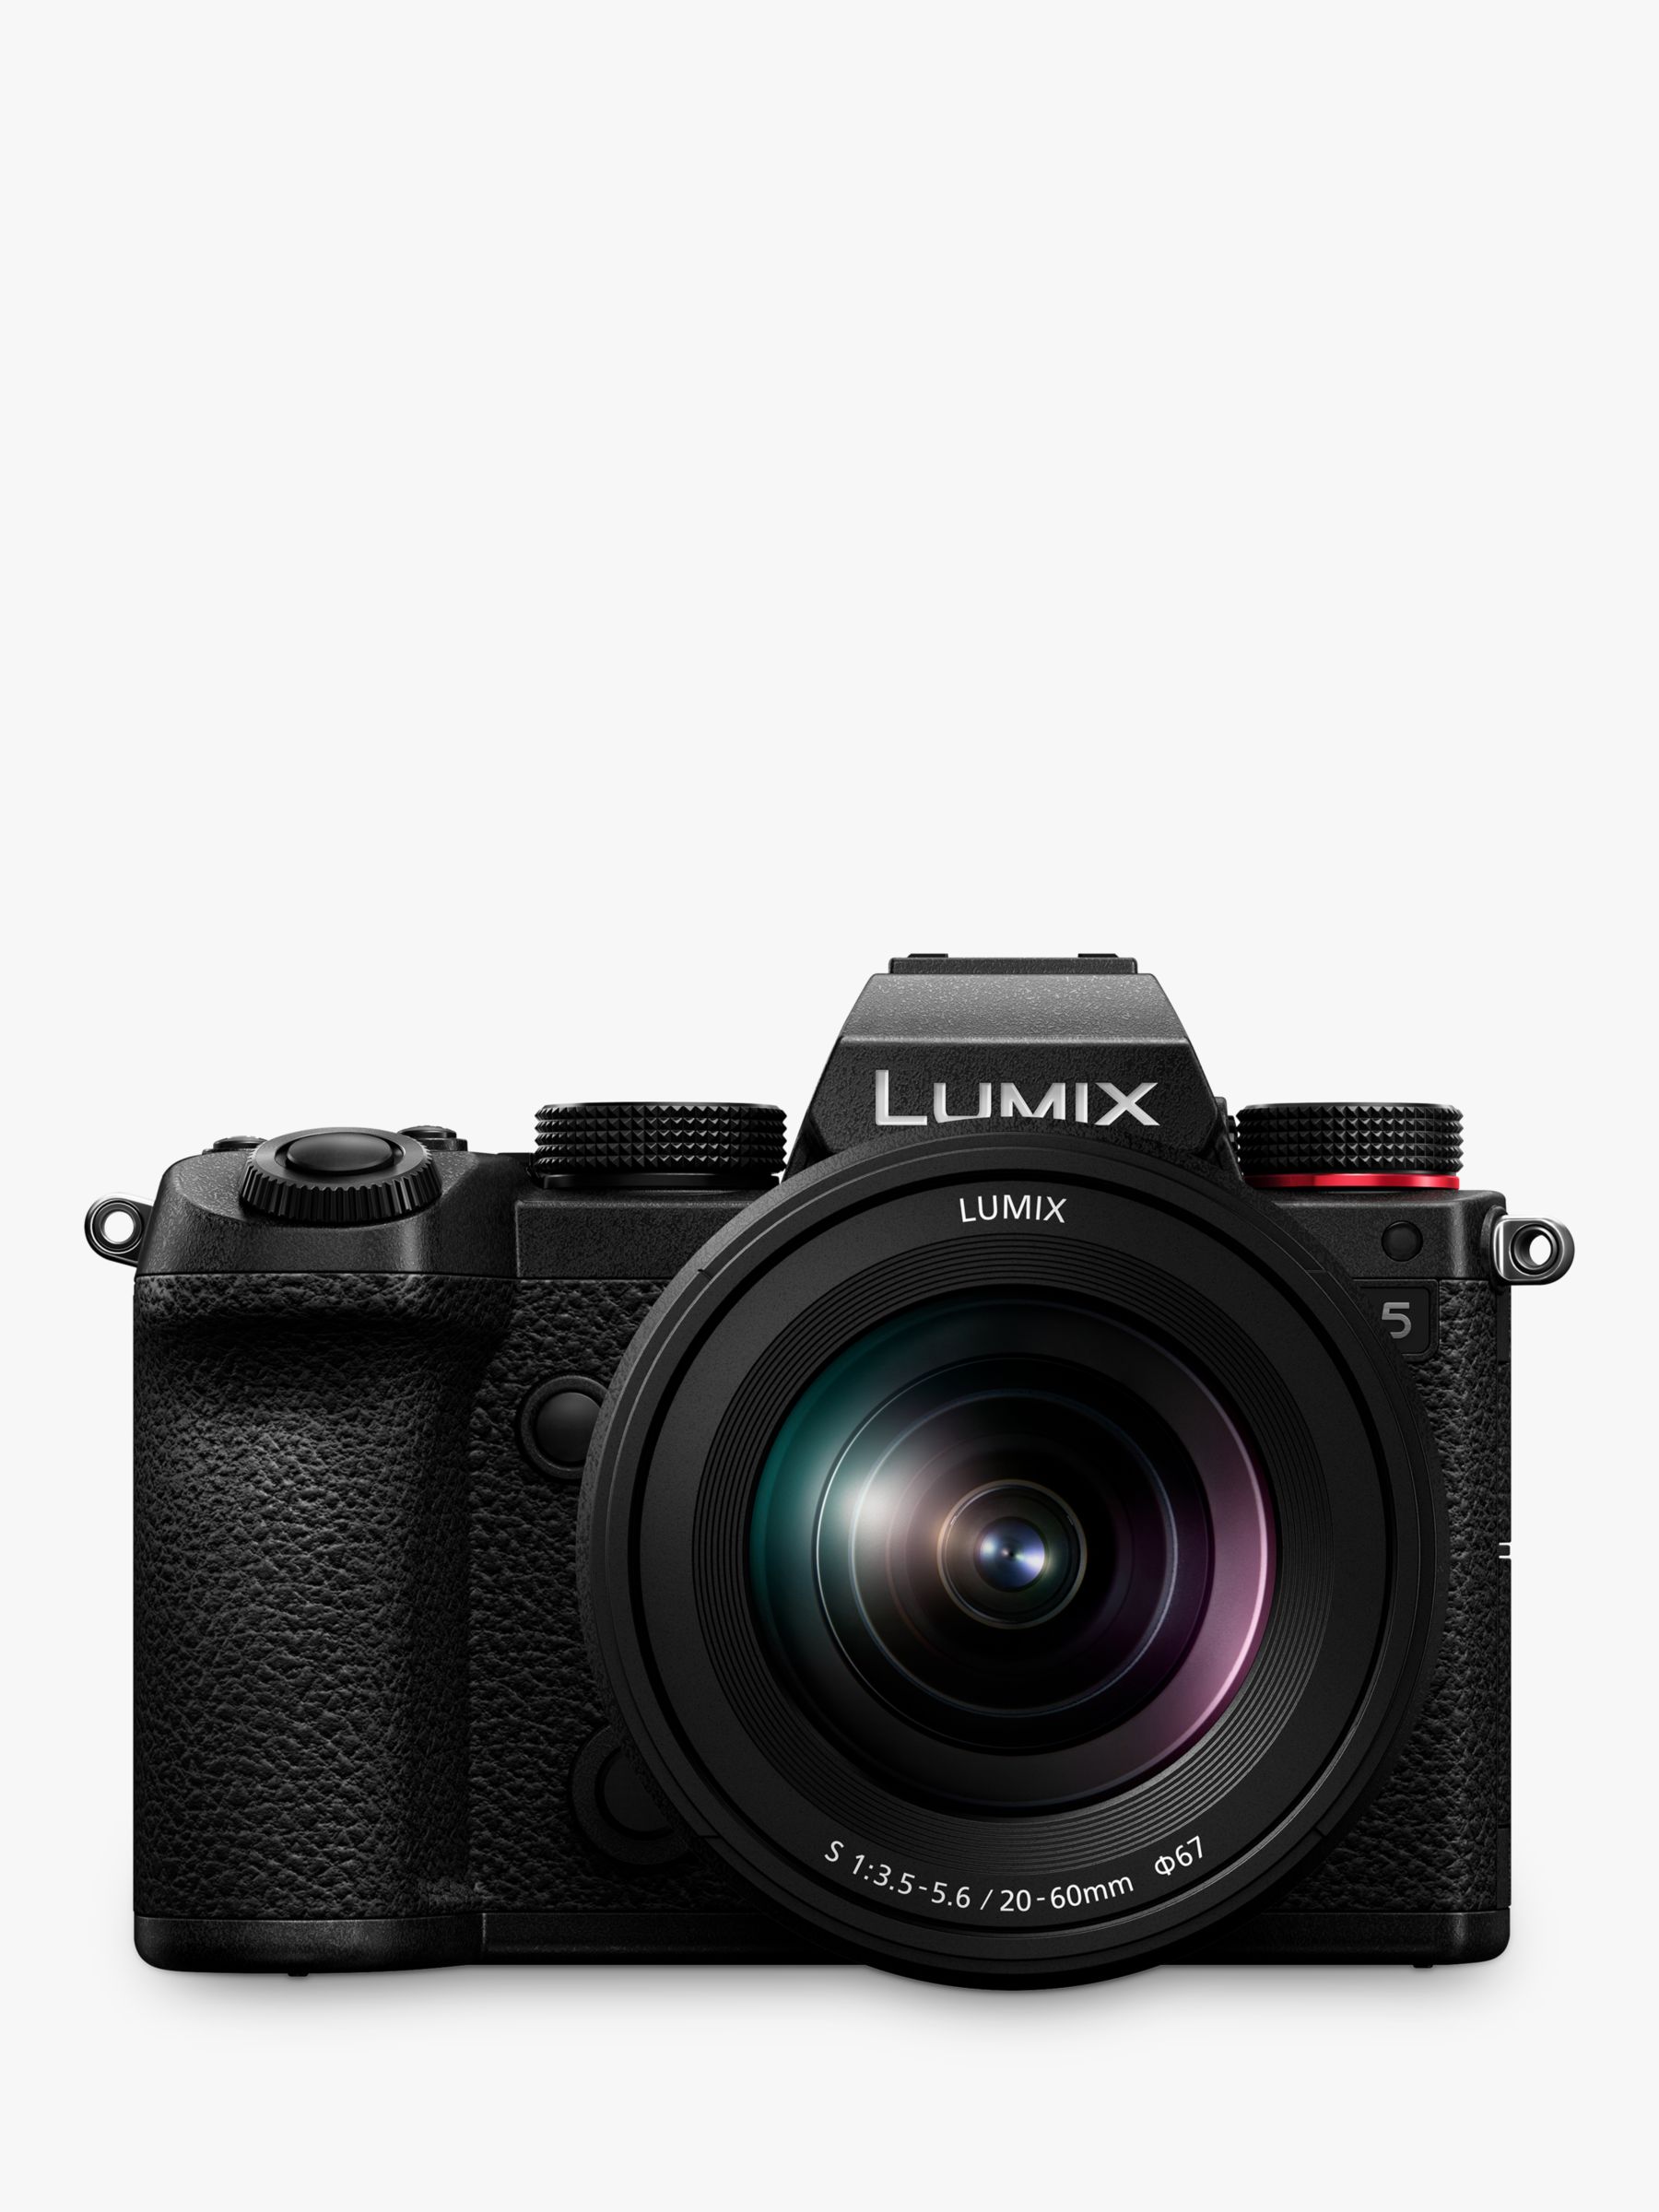 Panasonic Lumix DC-G9 Compact System Camera with Leica 12-60mm f2.8-4.0 Power O.I.S. Lens, 4K, 20.3MP, 4x Digital Zoom, Wi-Fi, OLED Viewfinder, 3" Vari-Angle Touch Screen, Black